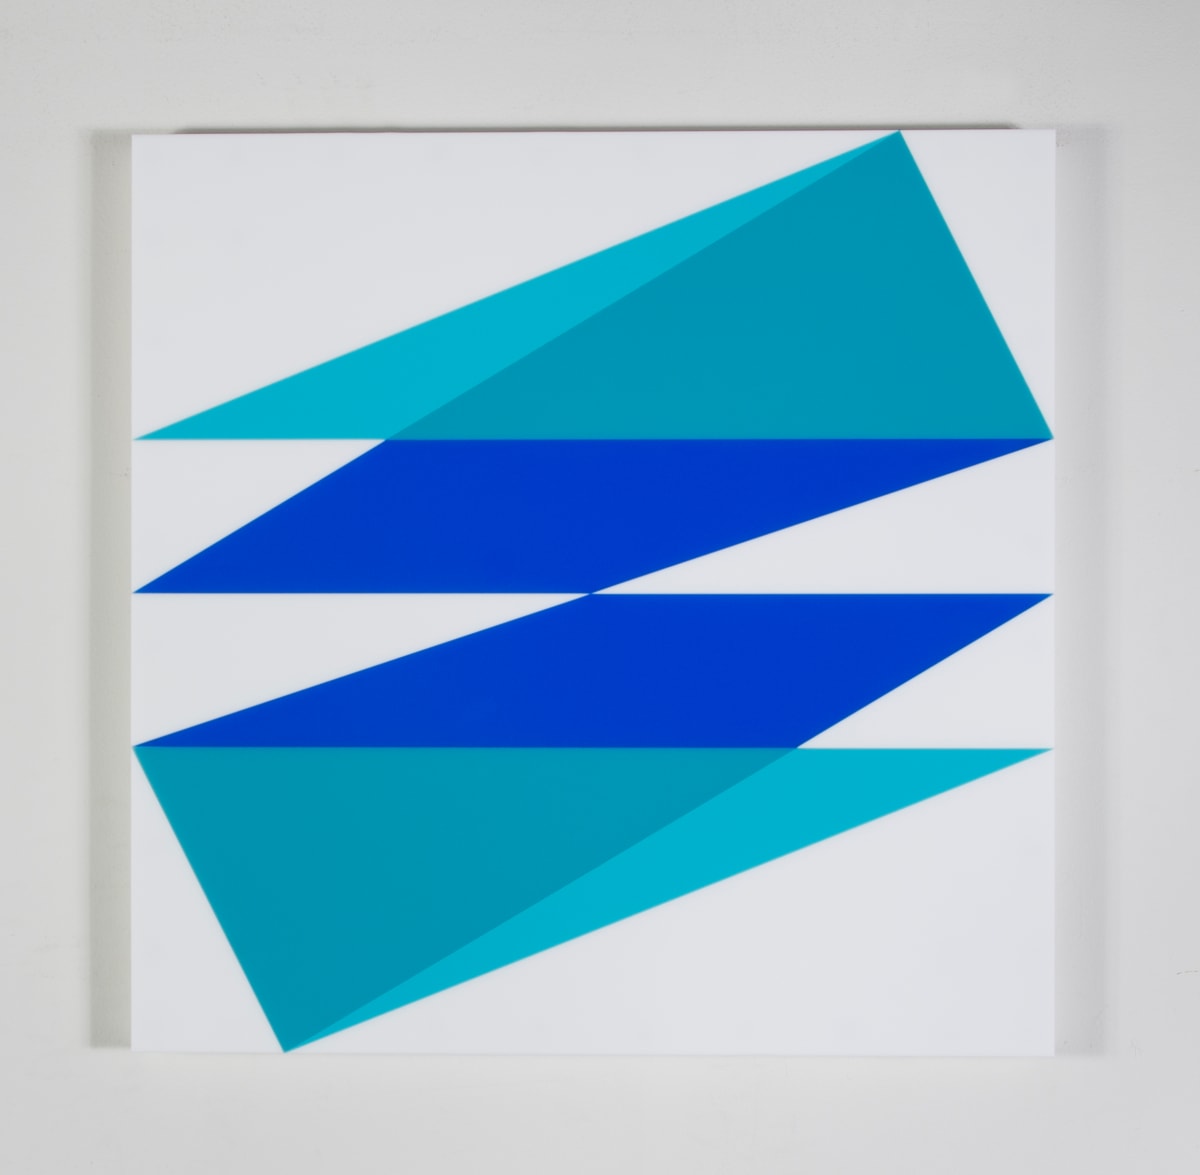 Composition in 2308 Turquoise, 2308 Turquoise, 2051 Blue and 7508M White by Brian Zink 